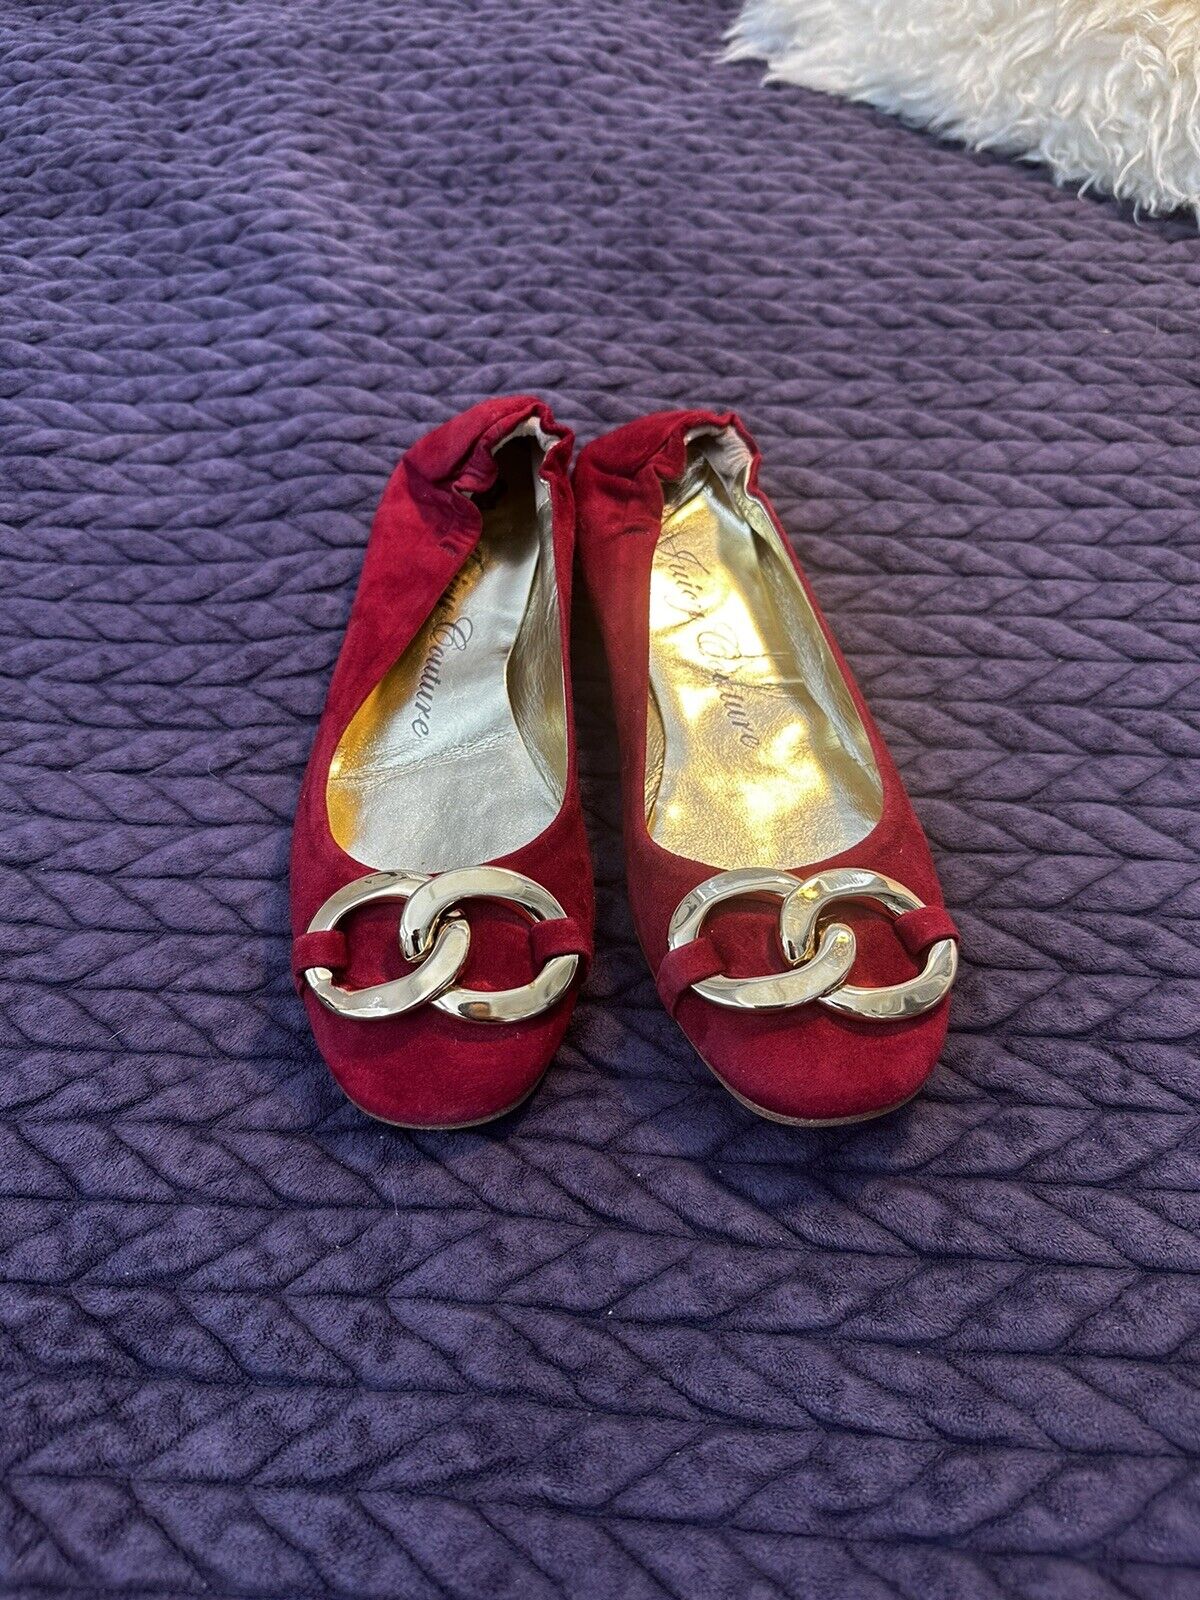 Juicy Couture Red flats Gold Hardware 6M - image 3